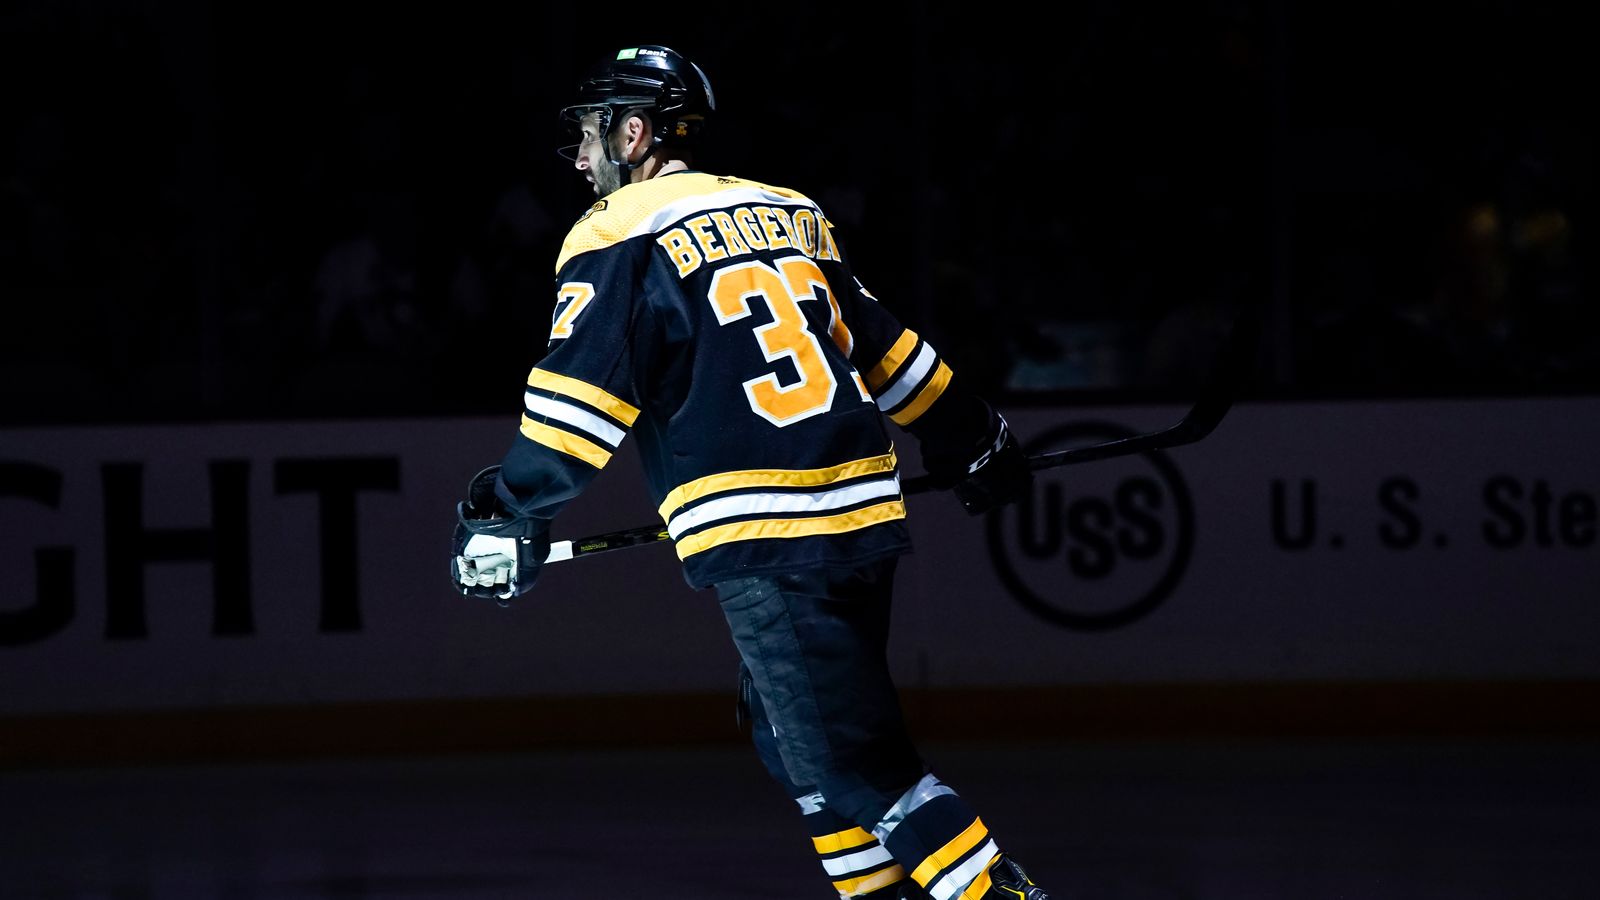 Why the Bruins should wait to name a captain until after the season